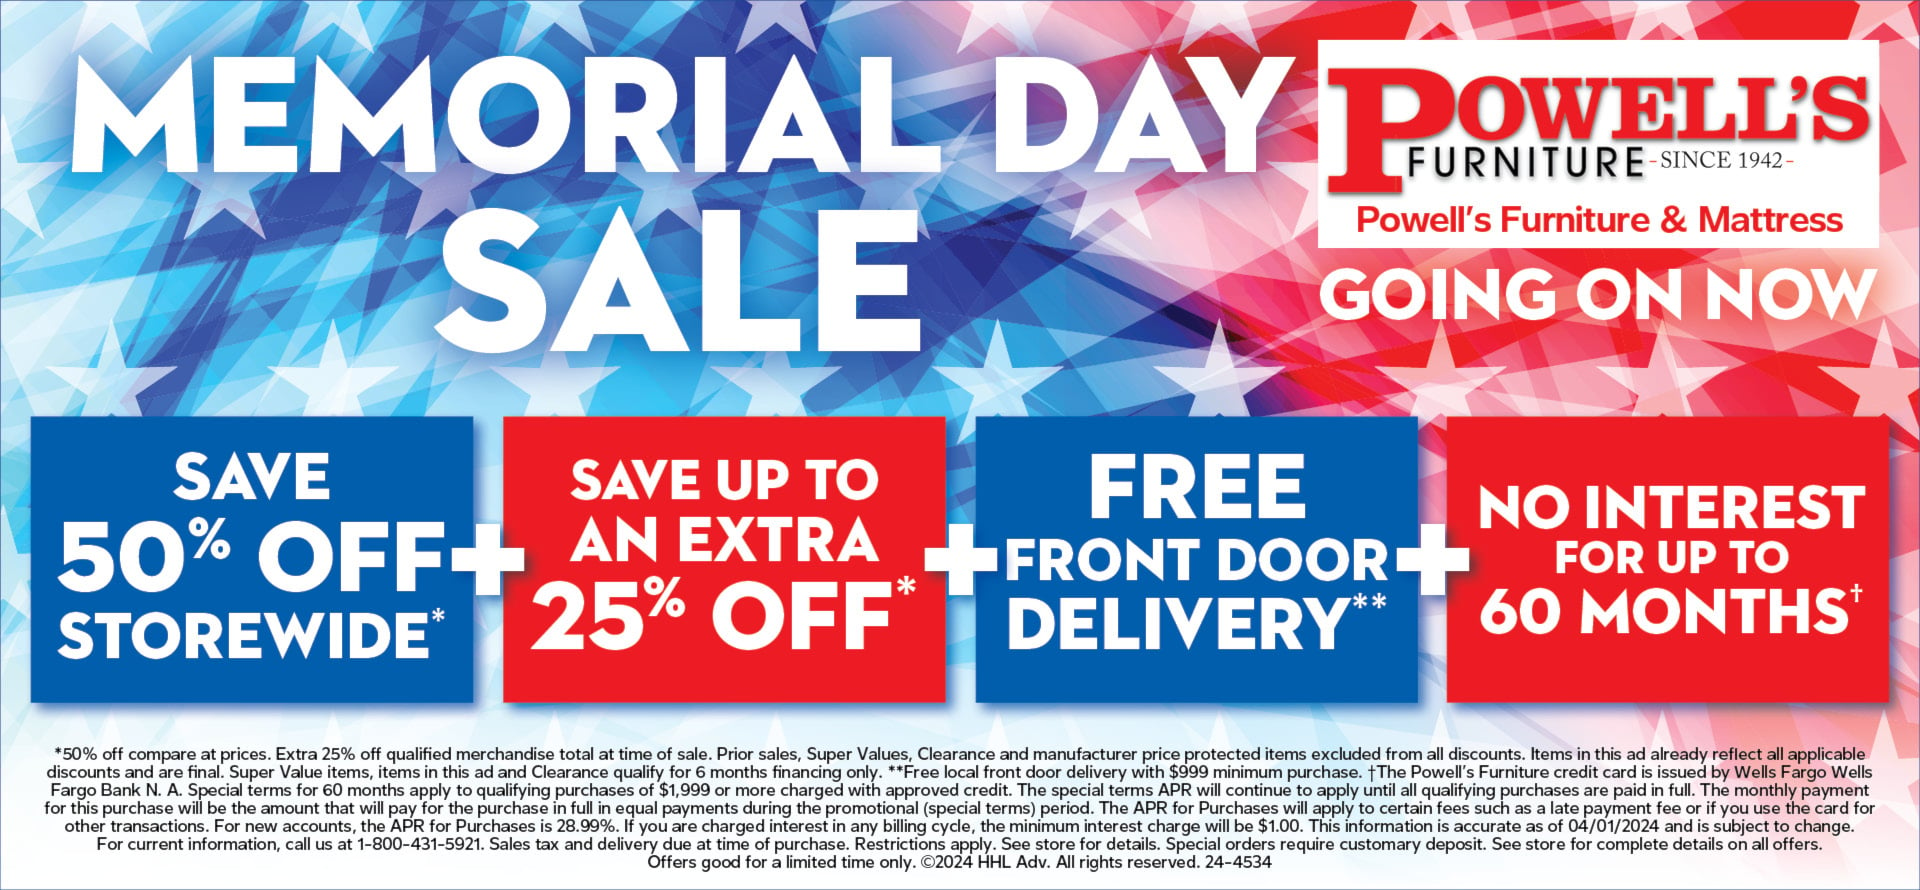 Powell's Memorial Day Sale